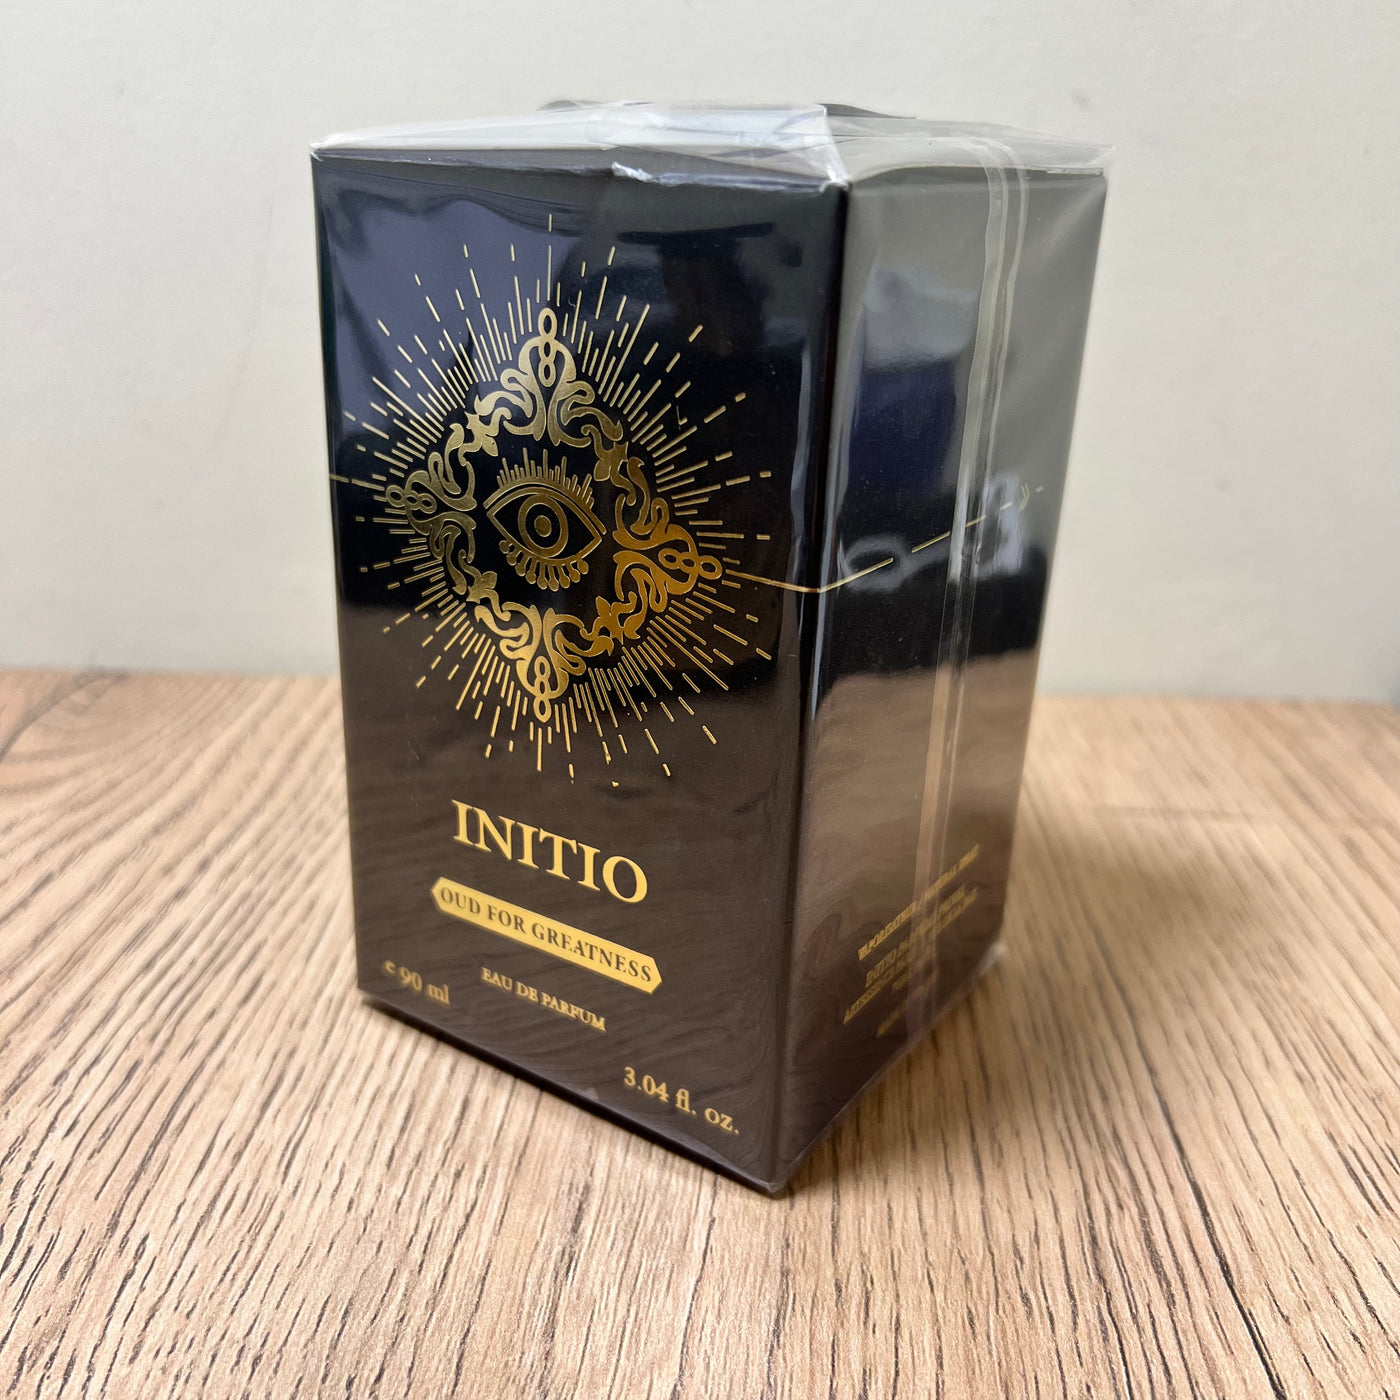 OUD FOR GREATNESS INITIO PARFUMS PRIVES